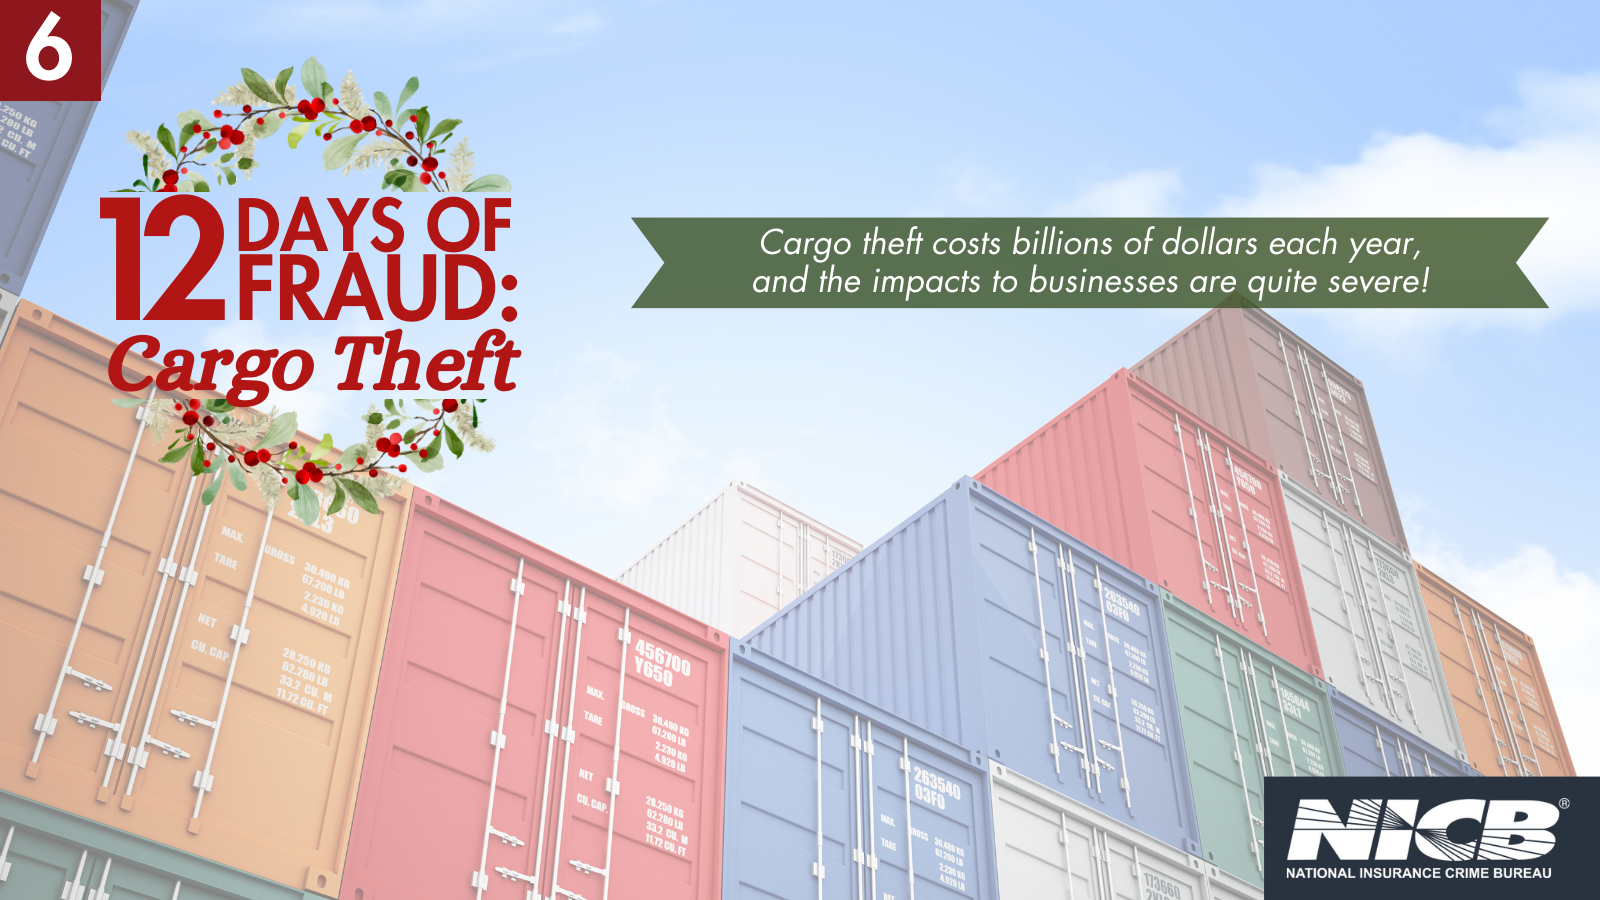 Cargo theft costs billions of dollars each year, and the impacts to businesses are quite severe!